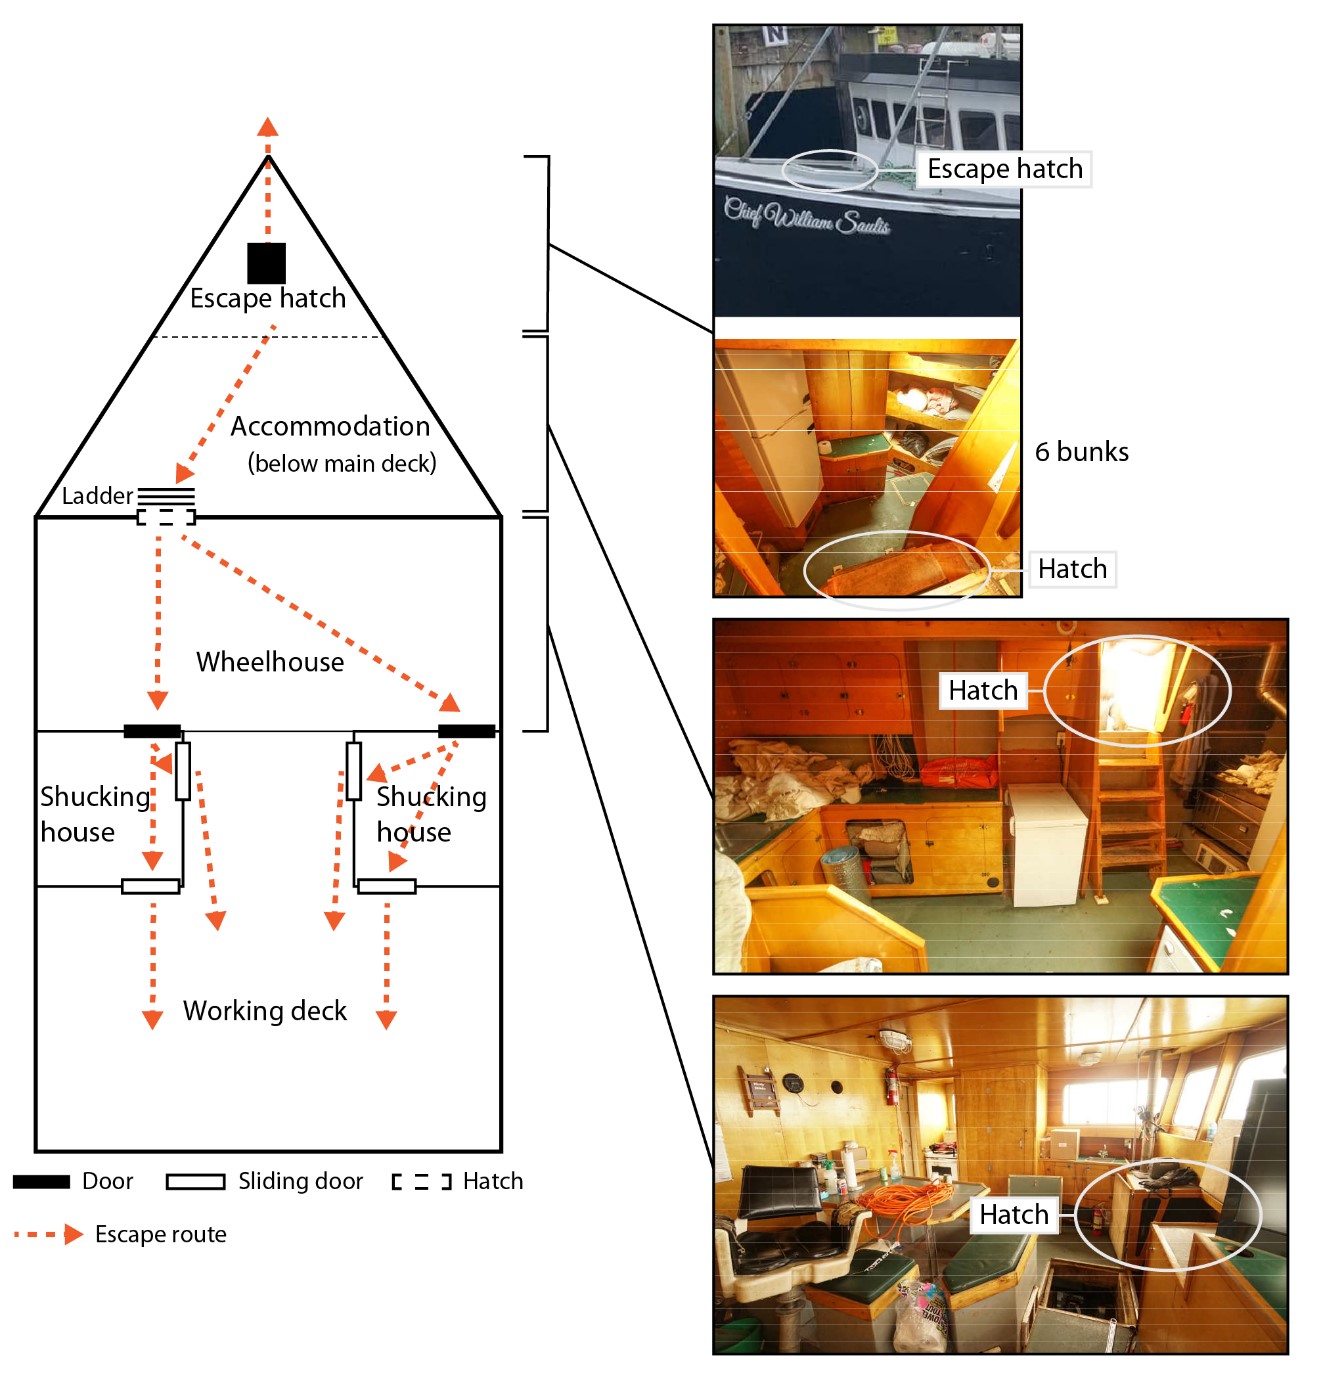 Diagram of the vessel and inset photos illustrating the main emergency escape route from the accommodation space to the deck, which required moving through the wheelhouse and a shucking house. The routes from the wheelhouse to the deck required moving through a shucking house. (Source of diagram: TSB, based on survey report by Jameson Theriault Marine Surveys. Source of escape hatch inset photo: Third party, with TSB annotations. Source of other inset photos: Jameson Theriault Marine Surveys, with TSB annotations)